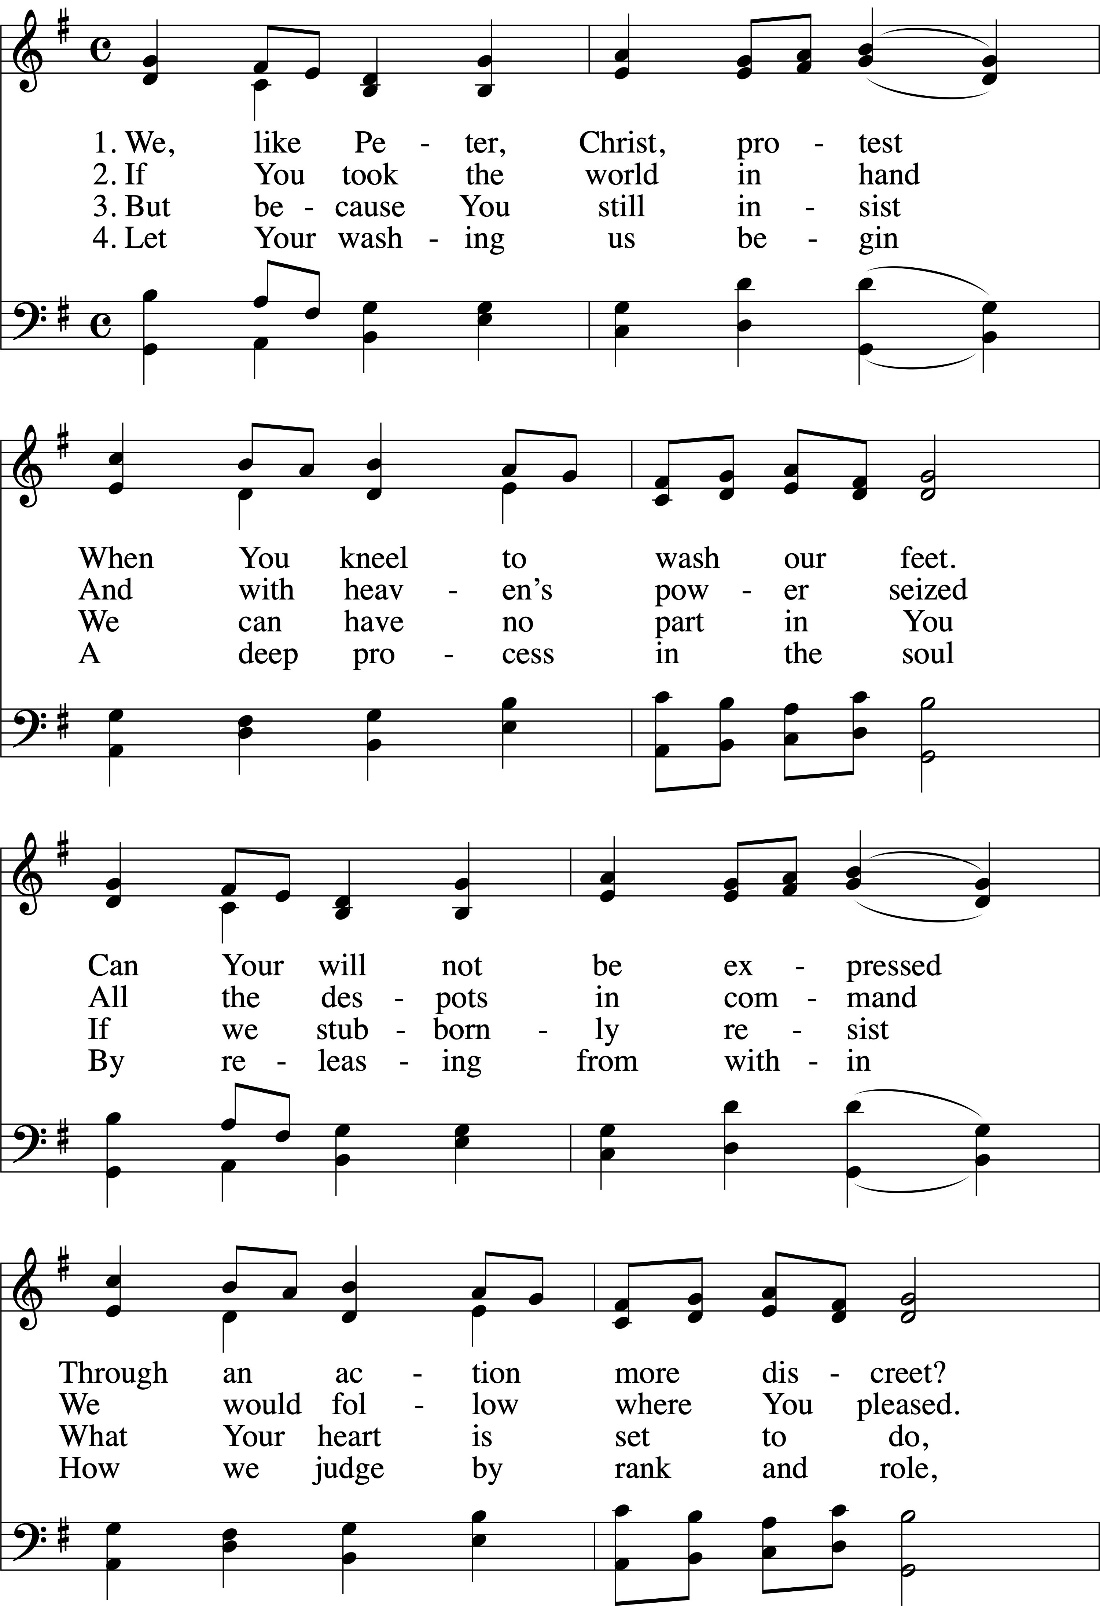 A sheet music with black and white text Description automatically generated